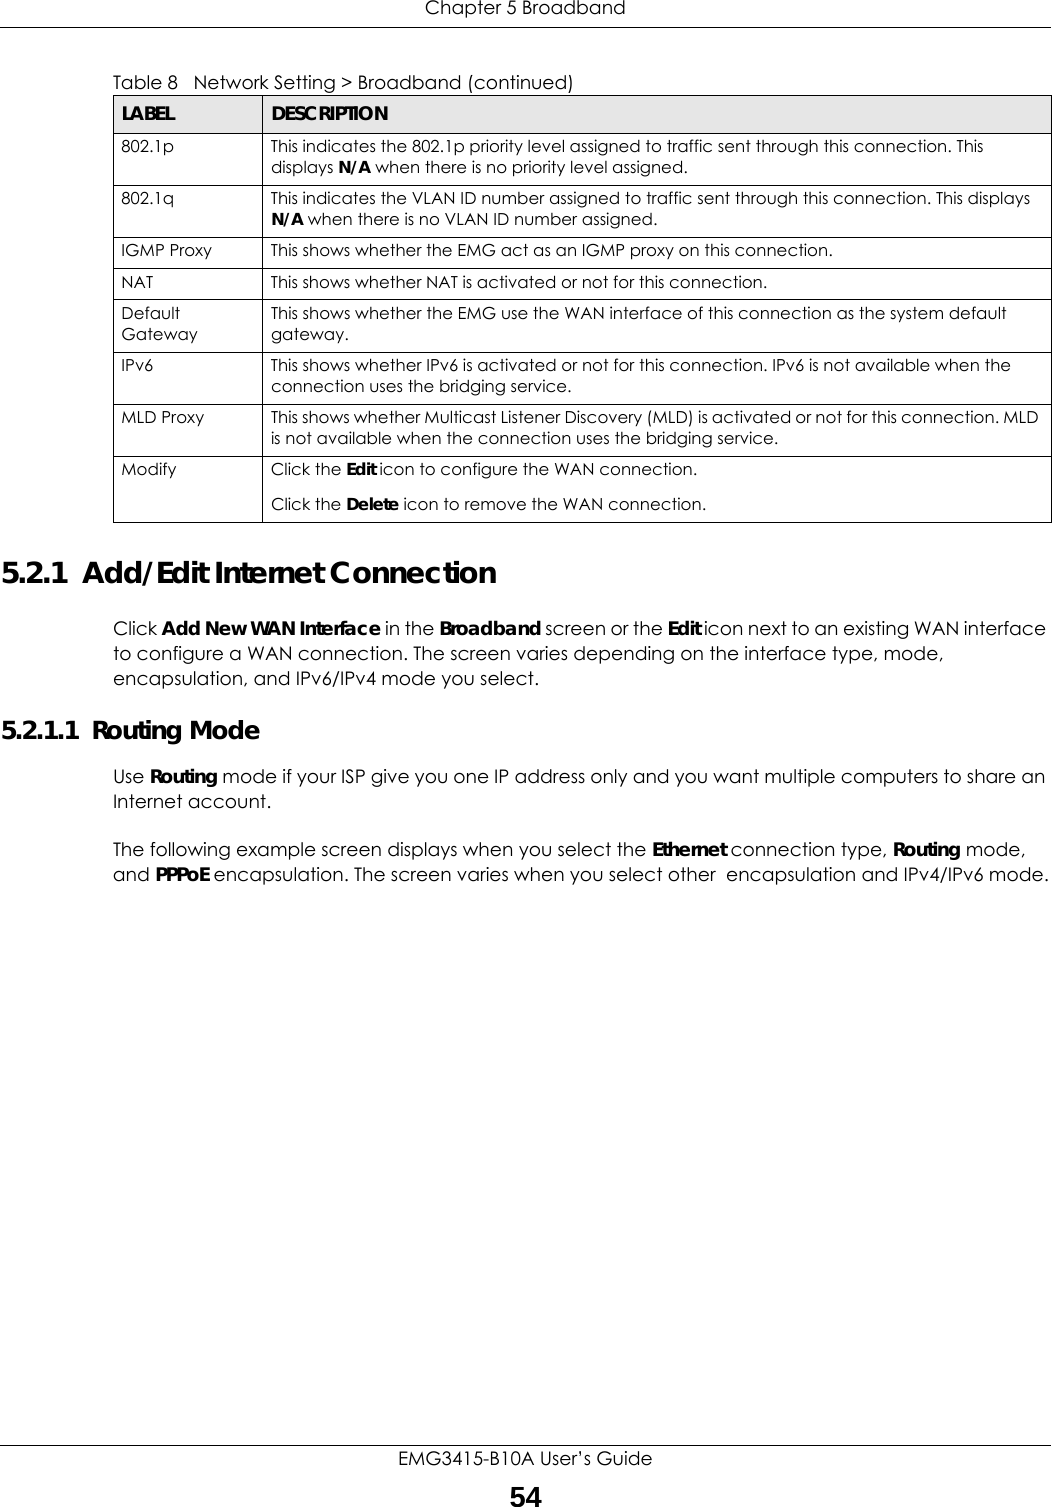 Chapter 5 BroadbandEMG3415-B10A User’s Guide545.2.1  Add/Edit Internet ConnectionClick Add New WAN Interface in the Broadband screen or the Edit icon next to an existing WAN interface to configure a WAN connection. The screen varies depending on the interface type, mode, encapsulation, and IPv6/IPv4 mode you select. 5.2.1.1  Routing ModeUse Routing mode if your ISP give you one IP address only and you want multiple computers to share an Internet account. The following example screen displays when you select the Ethernet connection type, Routing mode, and PPPoE encapsulation. The screen varies when you select other  encapsulation and IPv4/IPv6 mode.802.1p This indicates the 802.1p priority level assigned to traffic sent through this connection. This displays N/A when there is no priority level assigned.802.1q This indicates the VLAN ID number assigned to traffic sent through this connection. This displays N/A when there is no VLAN ID number assigned.IGMP Proxy This shows whether the EMG act as an IGMP proxy on this connection.NAT This shows whether NAT is activated or not for this connection. Default GatewayThis shows whether the EMG use the WAN interface of this connection as the system default gateway.IPv6 This shows whether IPv6 is activated or not for this connection. IPv6 is not available when the connection uses the bridging service.MLD Proxy This shows whether Multicast Listener Discovery (MLD) is activated or not for this connection. MLD is not available when the connection uses the bridging service.Modify Click the Edit icon to configure the WAN connection.Click the Delete icon to remove the WAN connection.Table 8   Network Setting &gt; Broadband (continued)LABEL DESCRIPTION